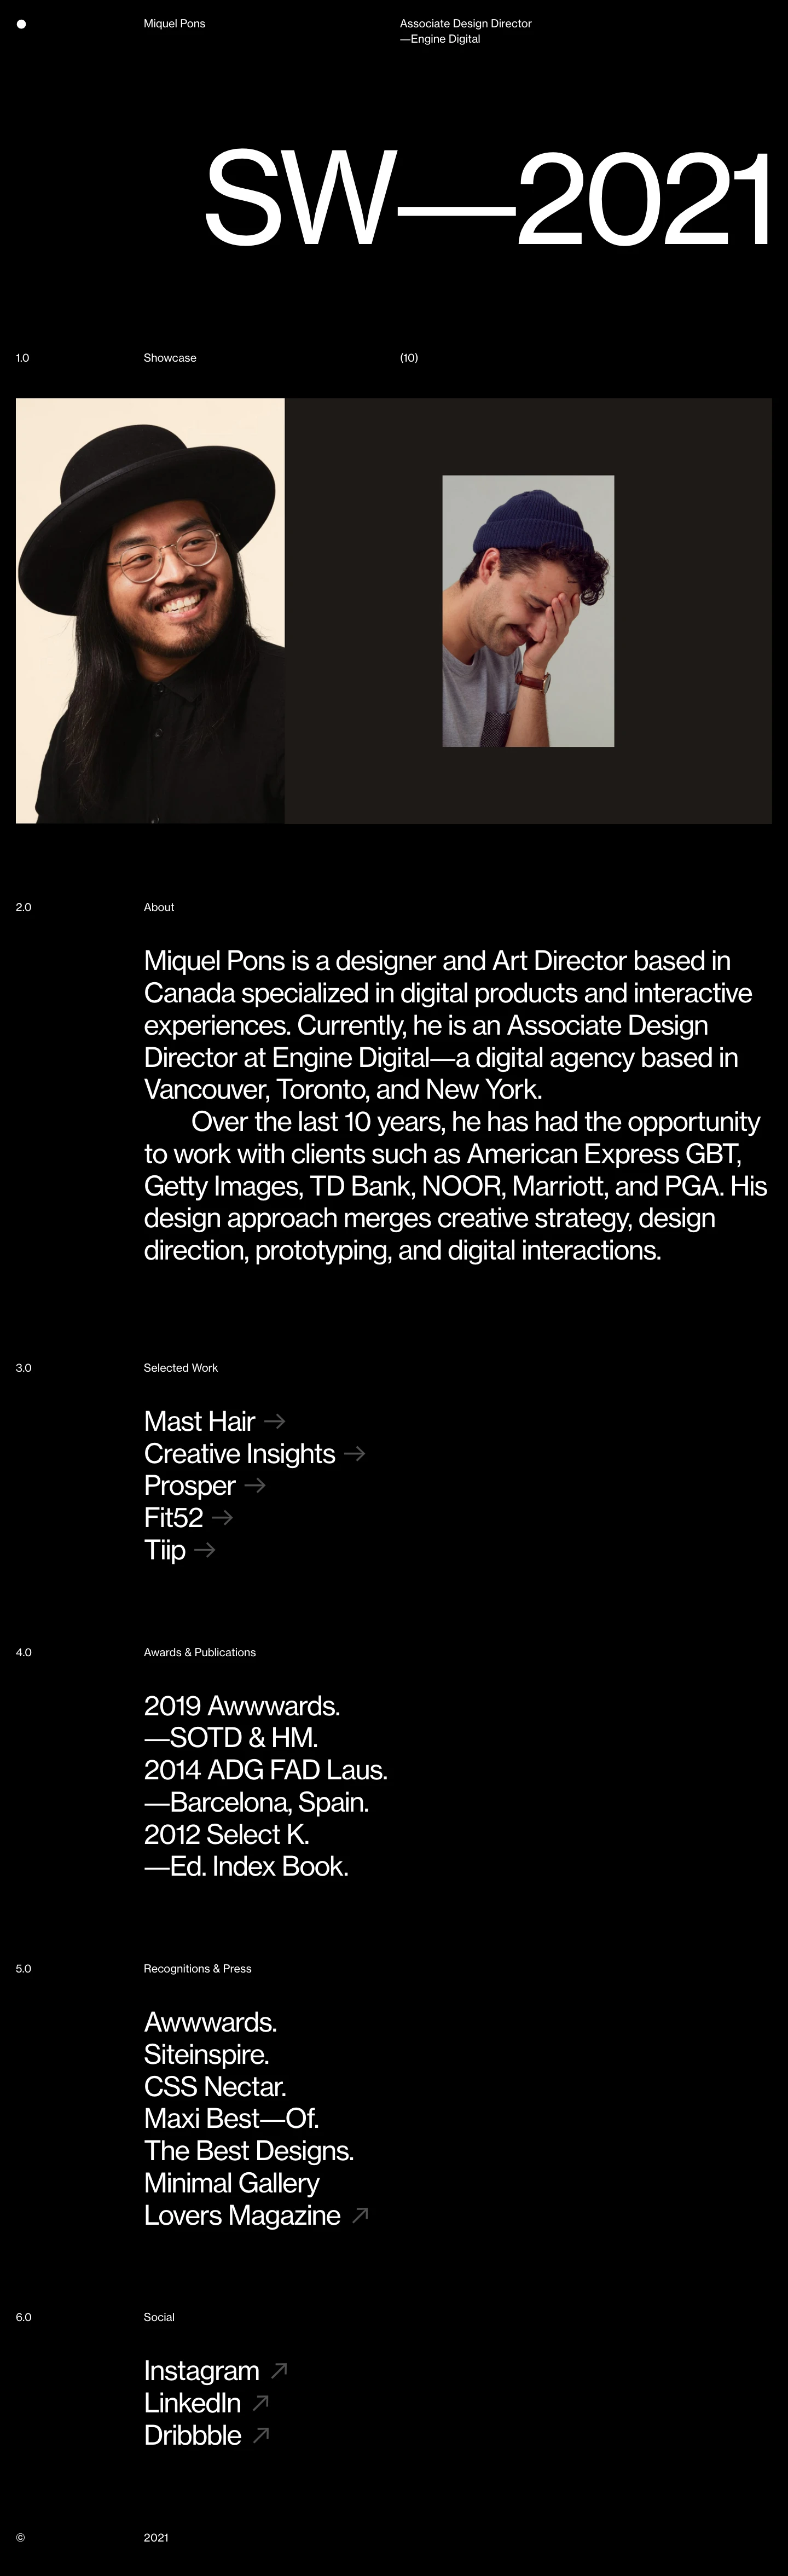 Miquel Pons Landing Page Example: Miquel Pons is a designer and Art Director based in Canada specialized in digital products and interactive experiences. Currently, he is an Associate Design Director at Engine Digital―a digital agency based in Vancouver, Toronto, and New York. Over the last 10 years, he has had the opportunity to work with clients such as American Express GBT, Getty Images, TD Bank, NOOR, Marriott, and PGA. His design approach merges creative strategy, design direction, prototyping, and digital interactions.